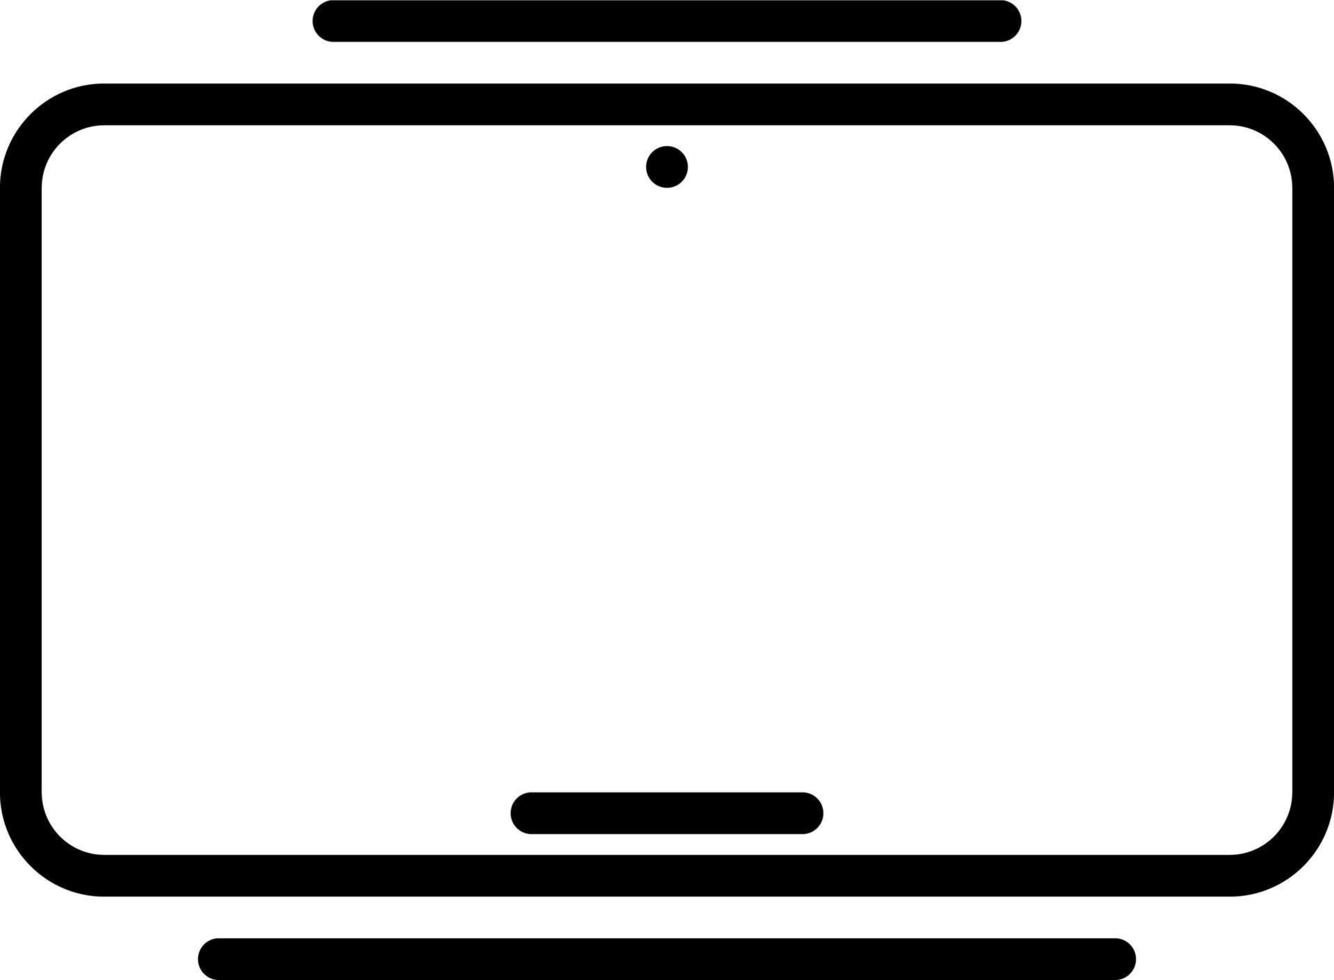 line icon for tablet vector